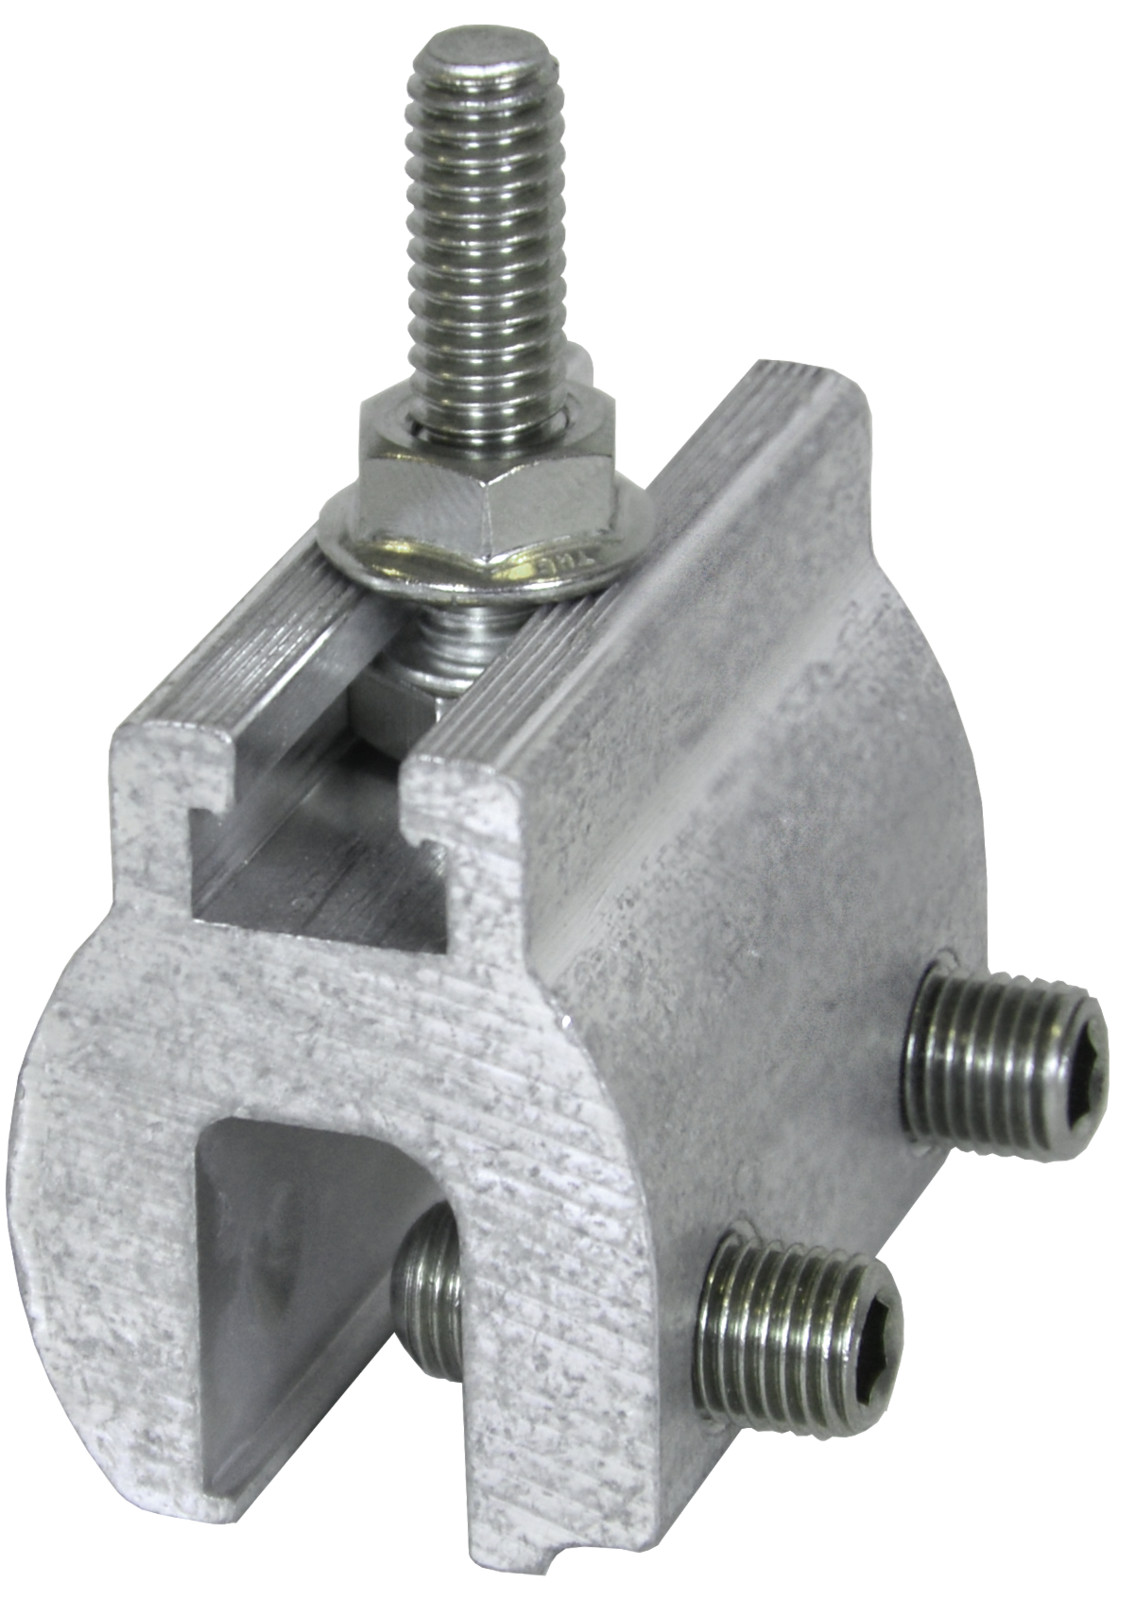 Released clamp. 
Reduced weight / cost by nearly 30%
T-Slot allows use of more cost effective hardware and adds versatility for use with other products.